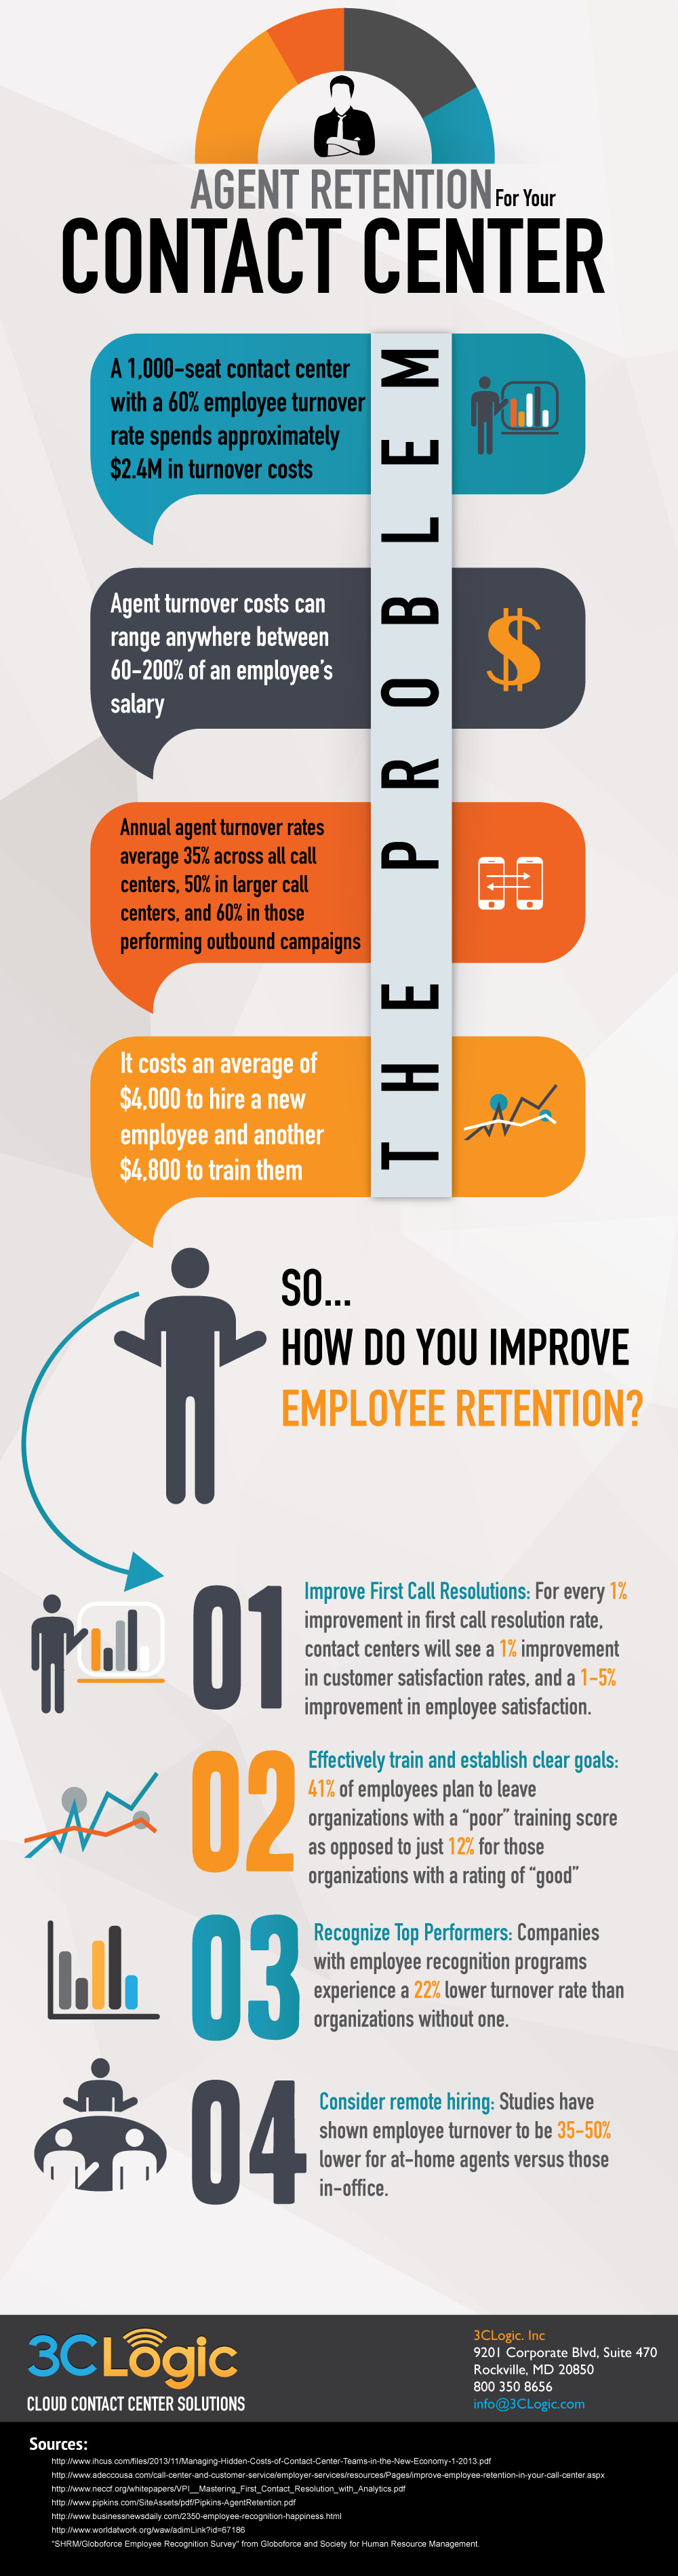 Infographic: How to Improve Agent Retention in Your Contact Center